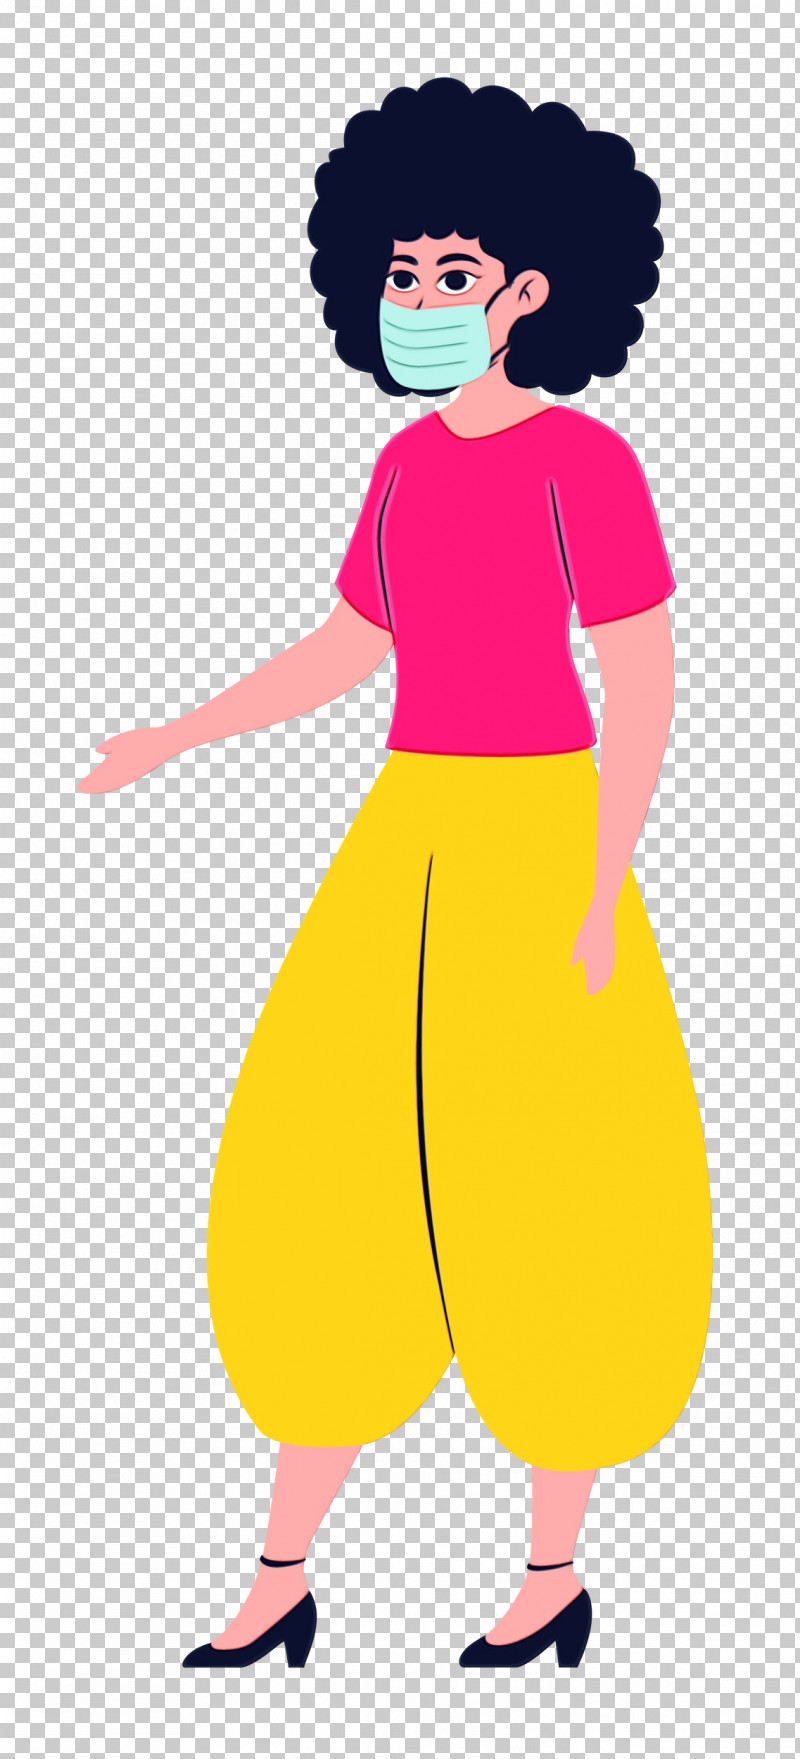 Cartoon Costume Character Yellow Happiness PNG, Clipart, Cartoon, Character, Costume, Girl, Happiness Free PNG Download